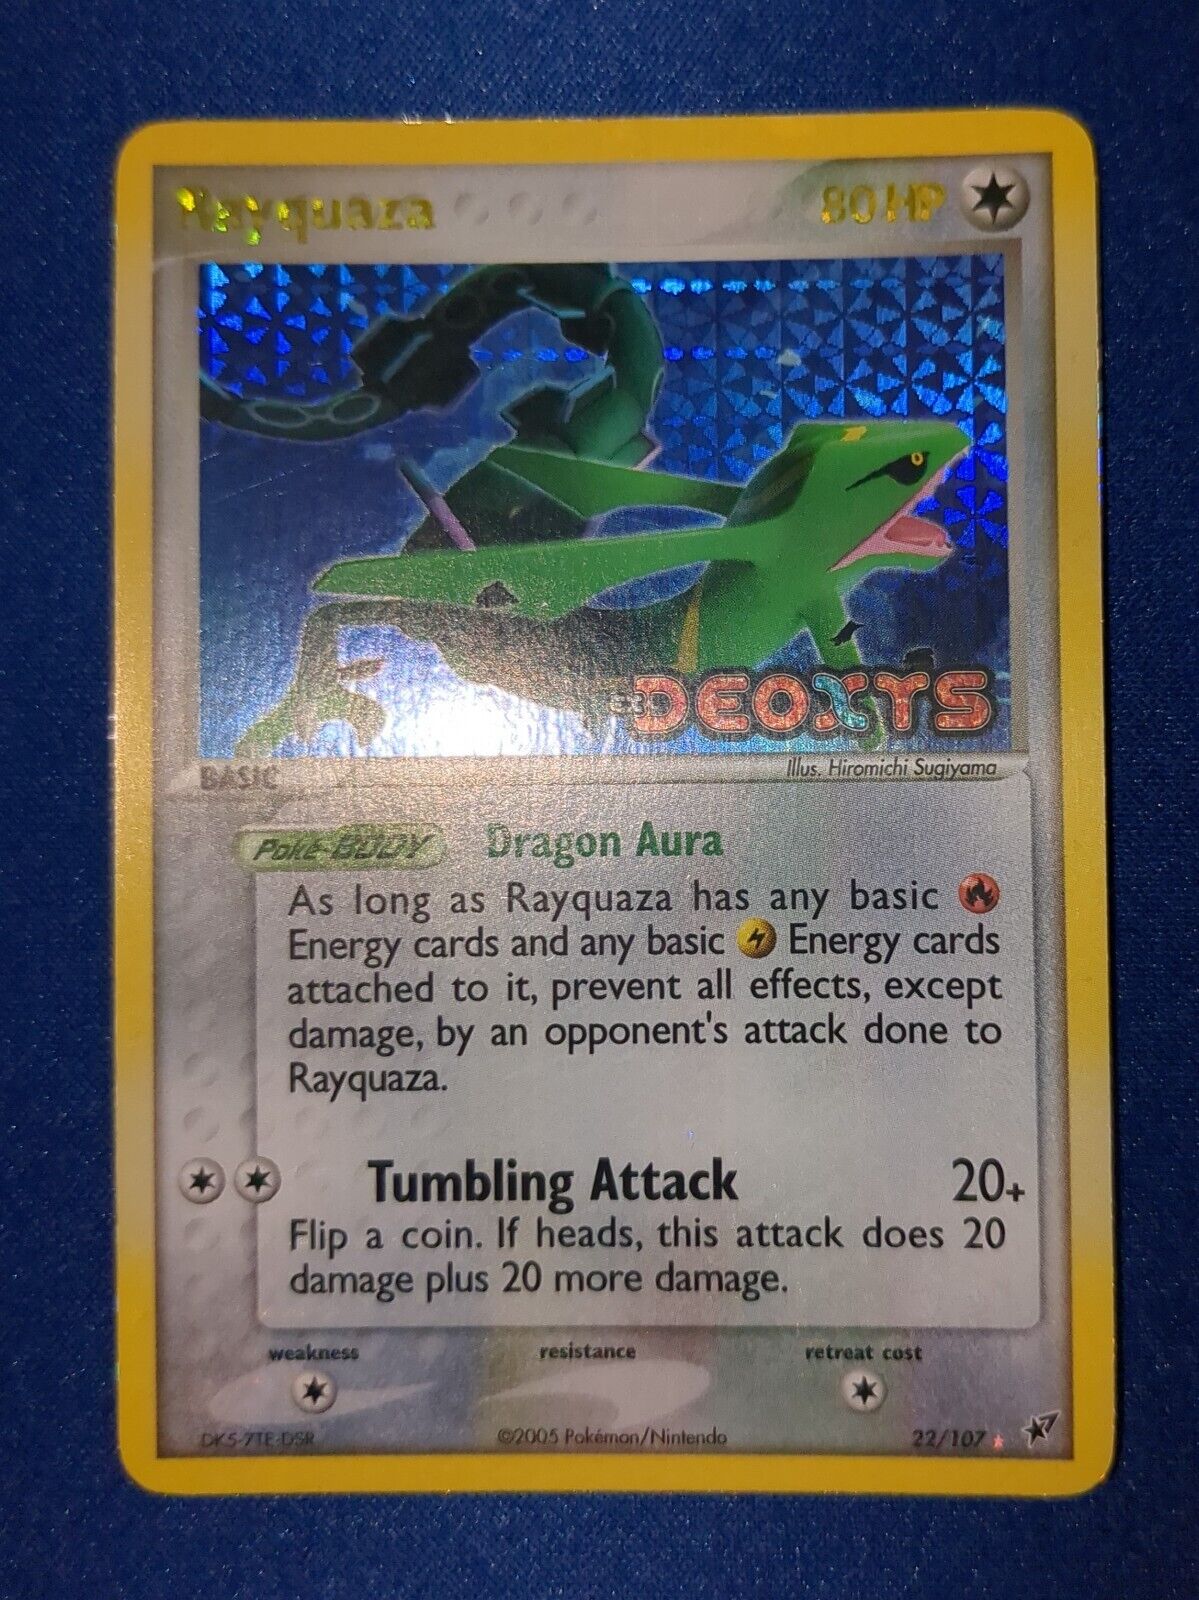 Pokemon EX DEOXYS - #22/107 Rayquaza - ENG - Stamped